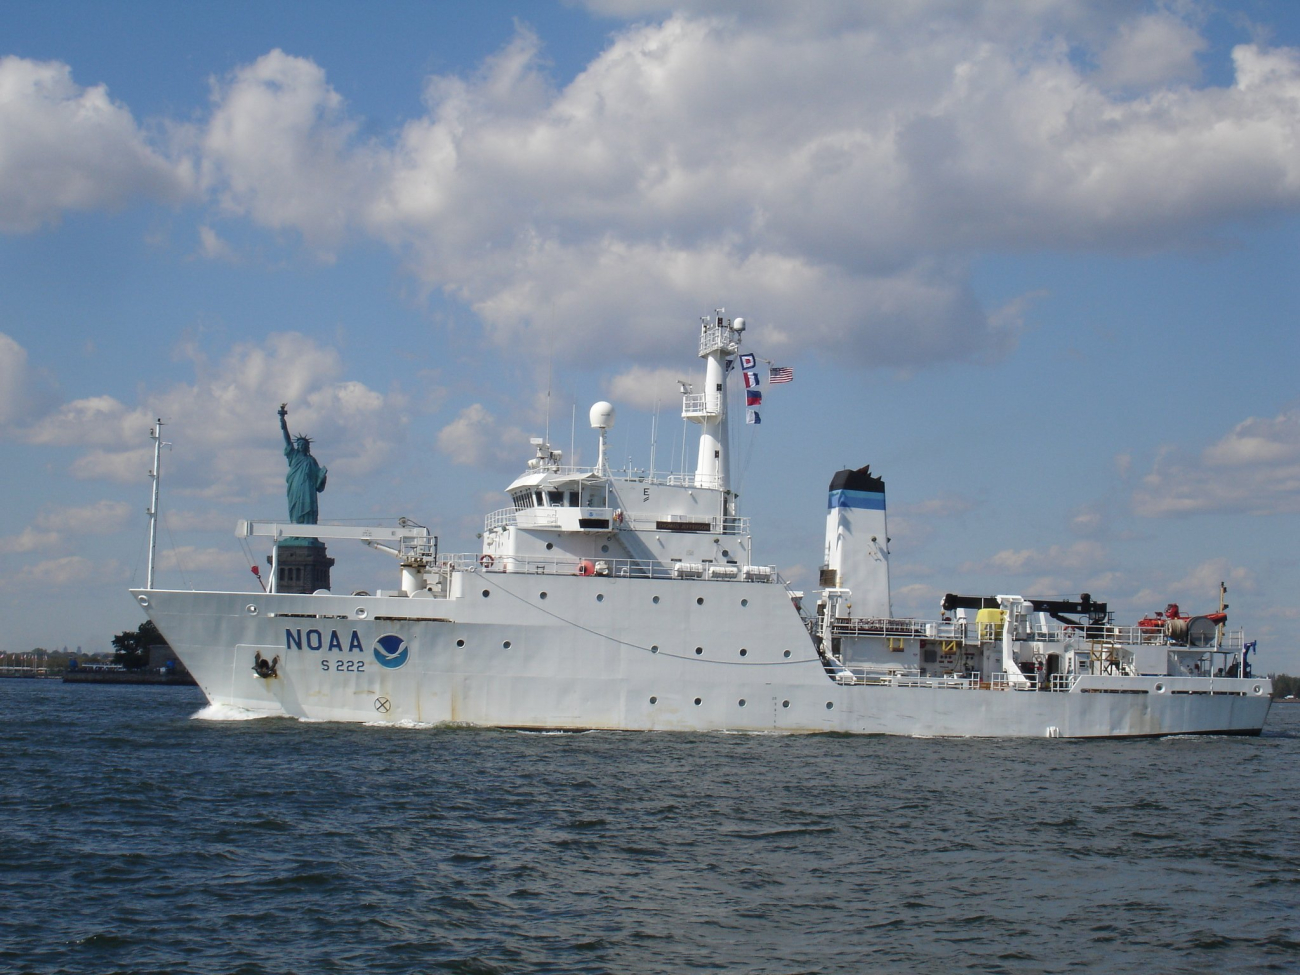 NOAA Ship THOMAS JEFFERSON in New York Harbor abreast of theStatue of Liberty